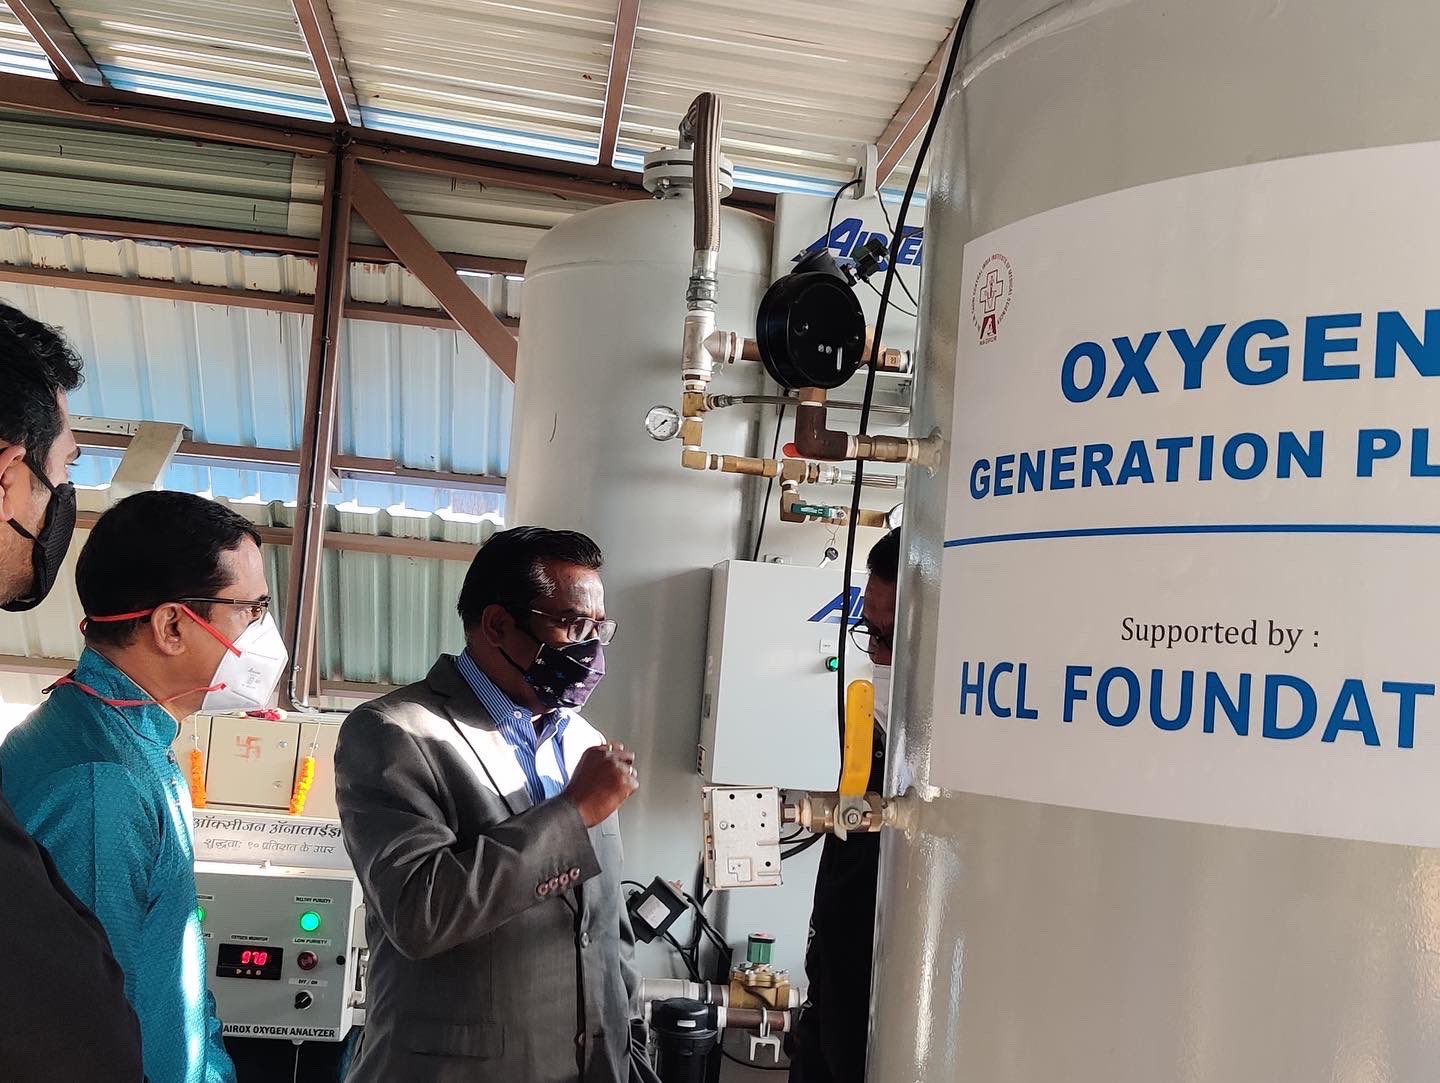 HCL Foundation supported an oxygen generation plant at CIIMS Hospital